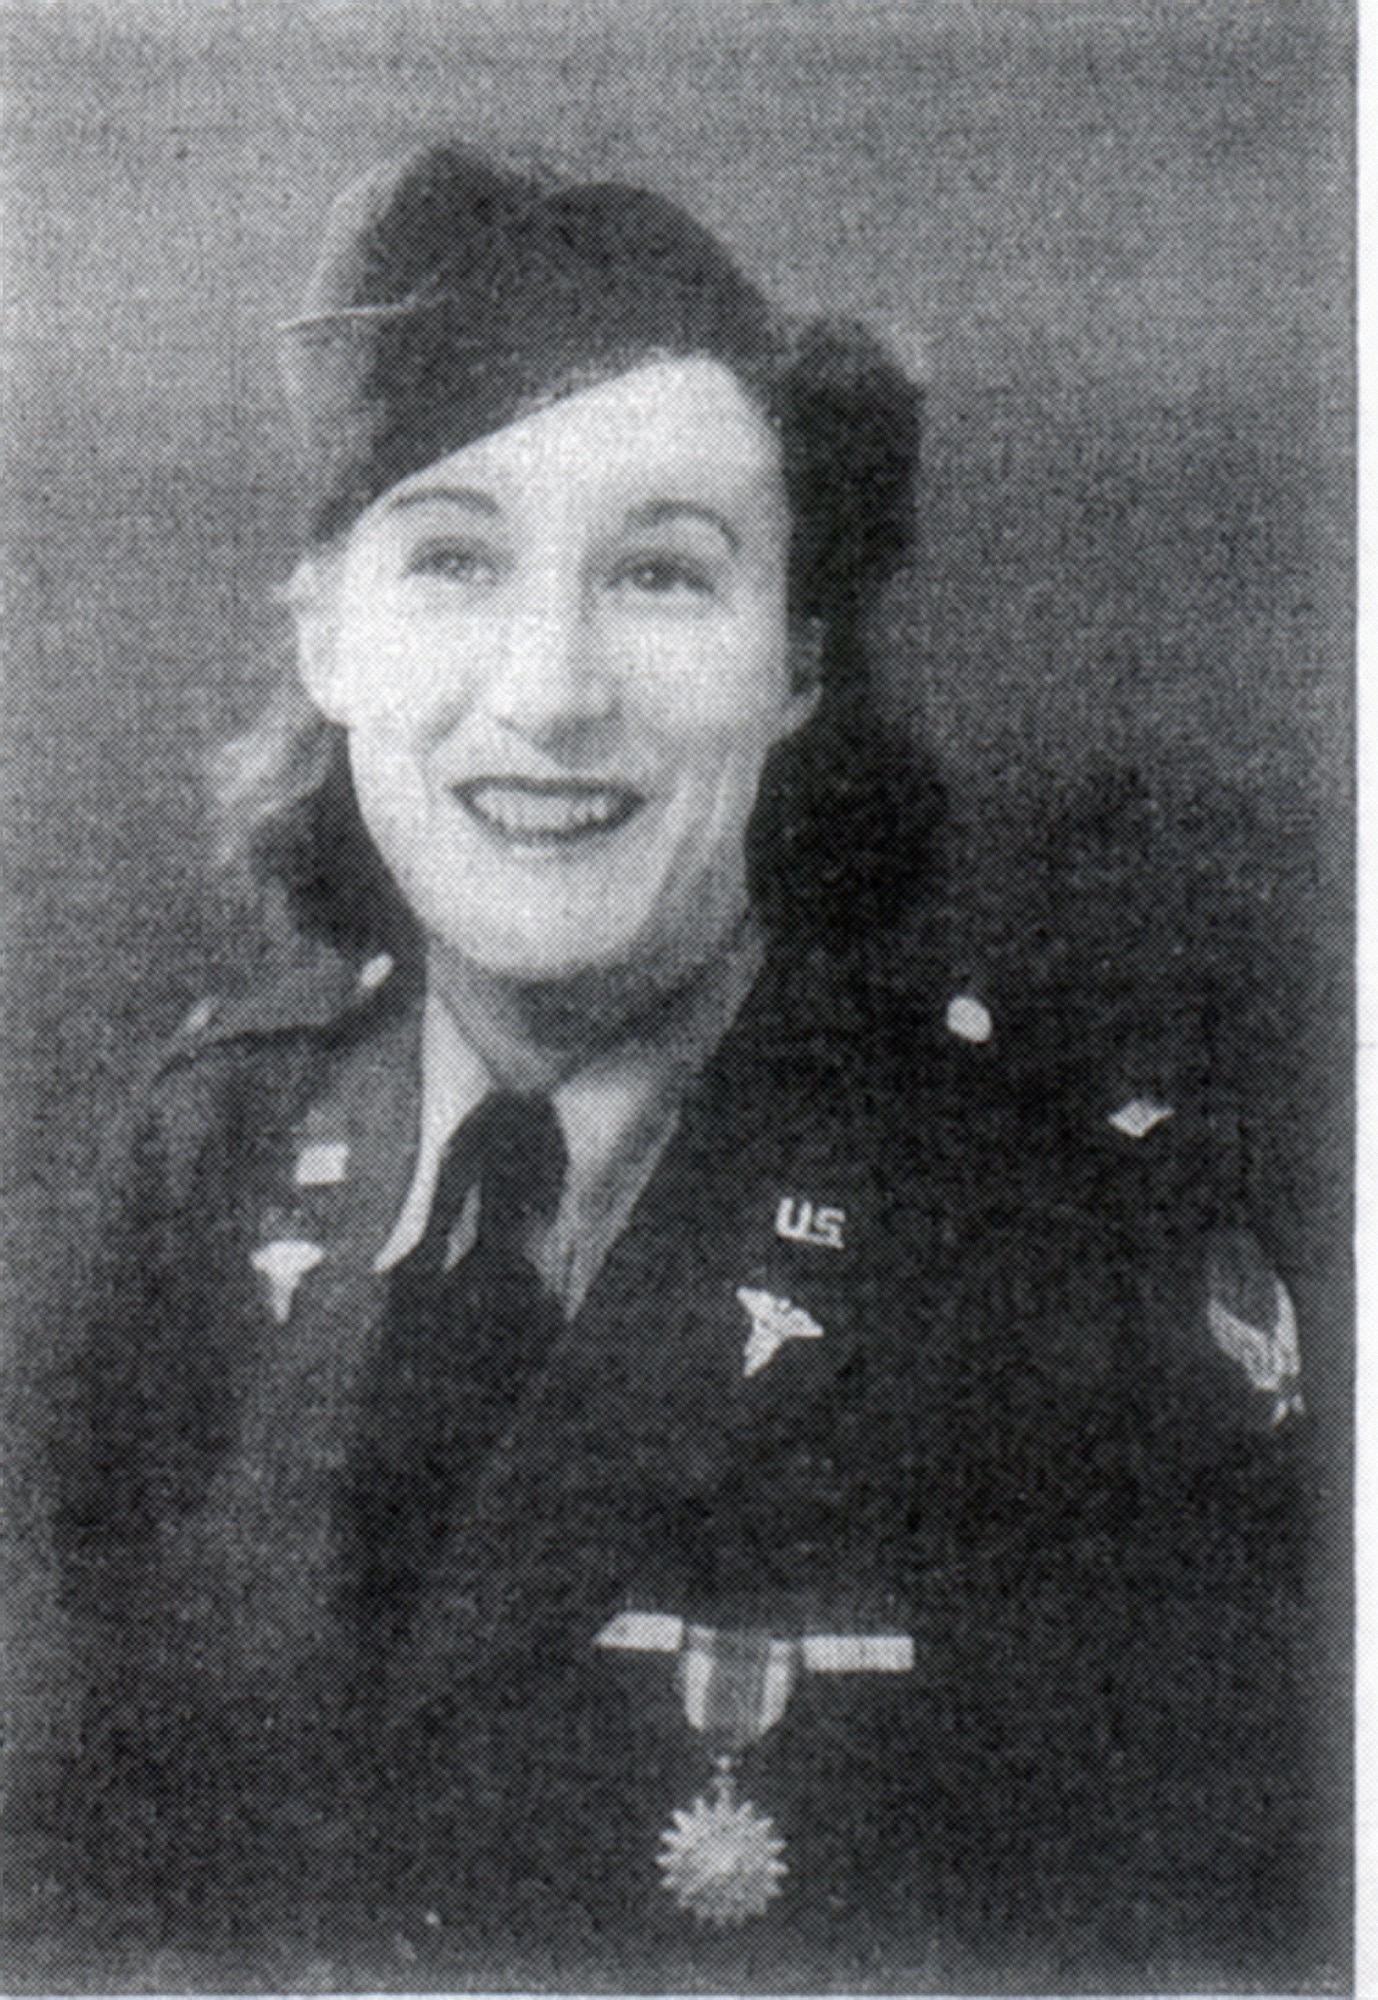 U.S. Air Force 2nd Lt. Elsie Ott, the first woman to receive the Air Medal. (Photo courtesy of the National Museum of the USAF)